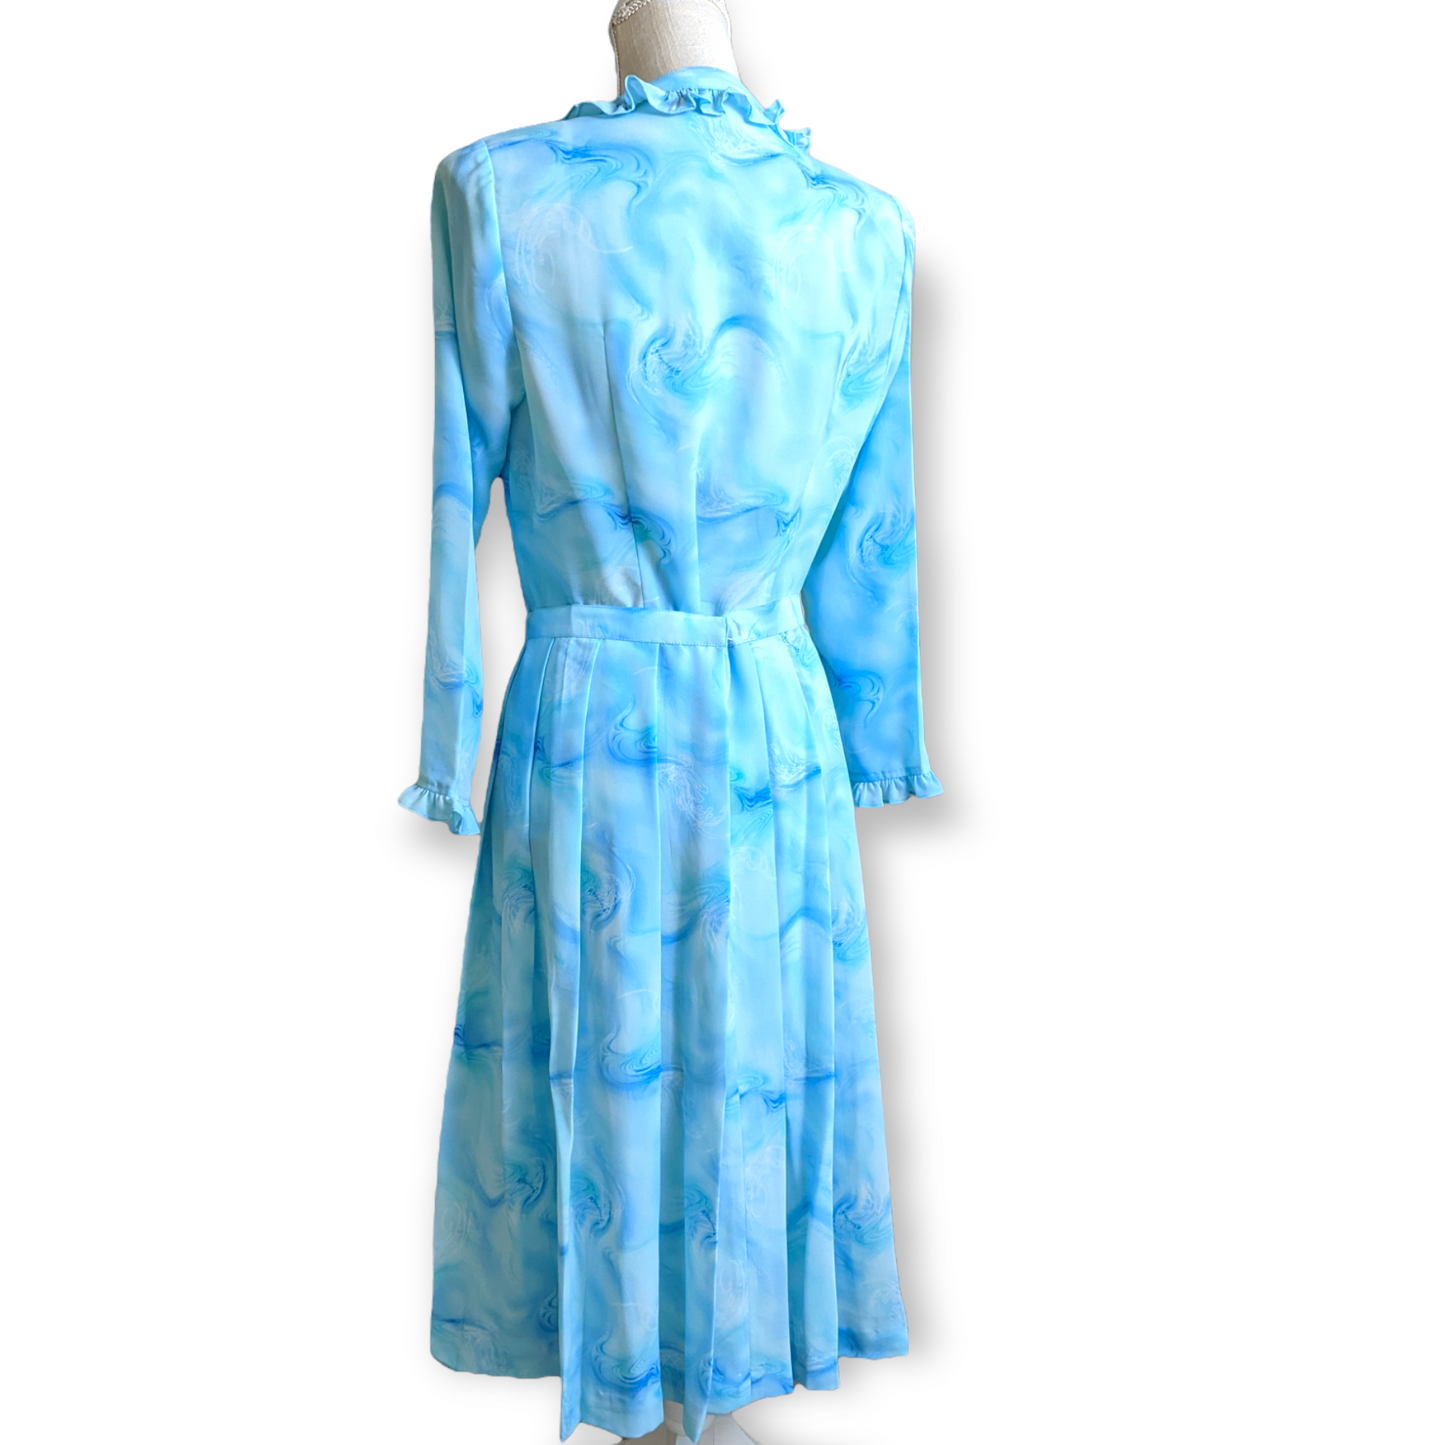 1980s Silk Blue Watercolor Two Piece Blouse and Pleated Skirt Set With Ruffle Details, Rounded Collar, Long Sleeves and Charming Soft Blue Buttons